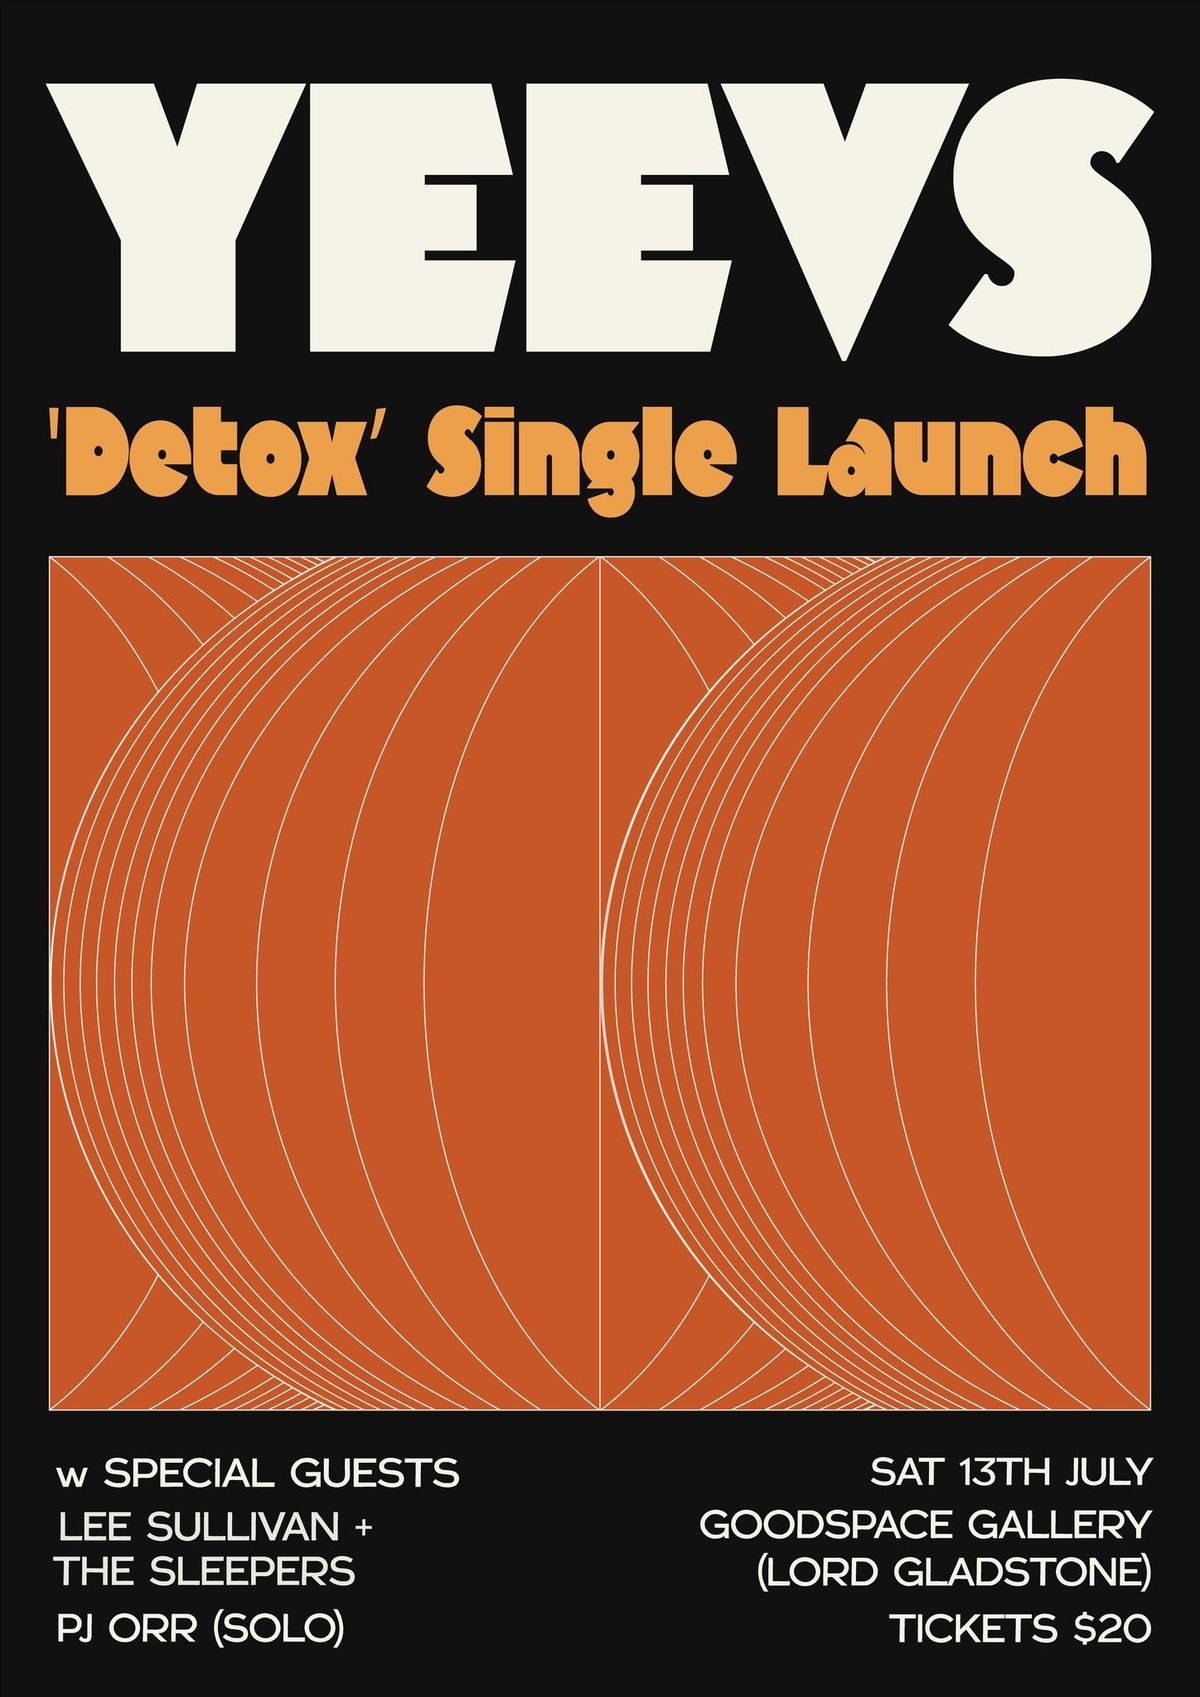 YEEVS 'Detox' single launch at Lord Gladstone W\/Lee Sullivan & The Sleepers + PJ Orr (solo)